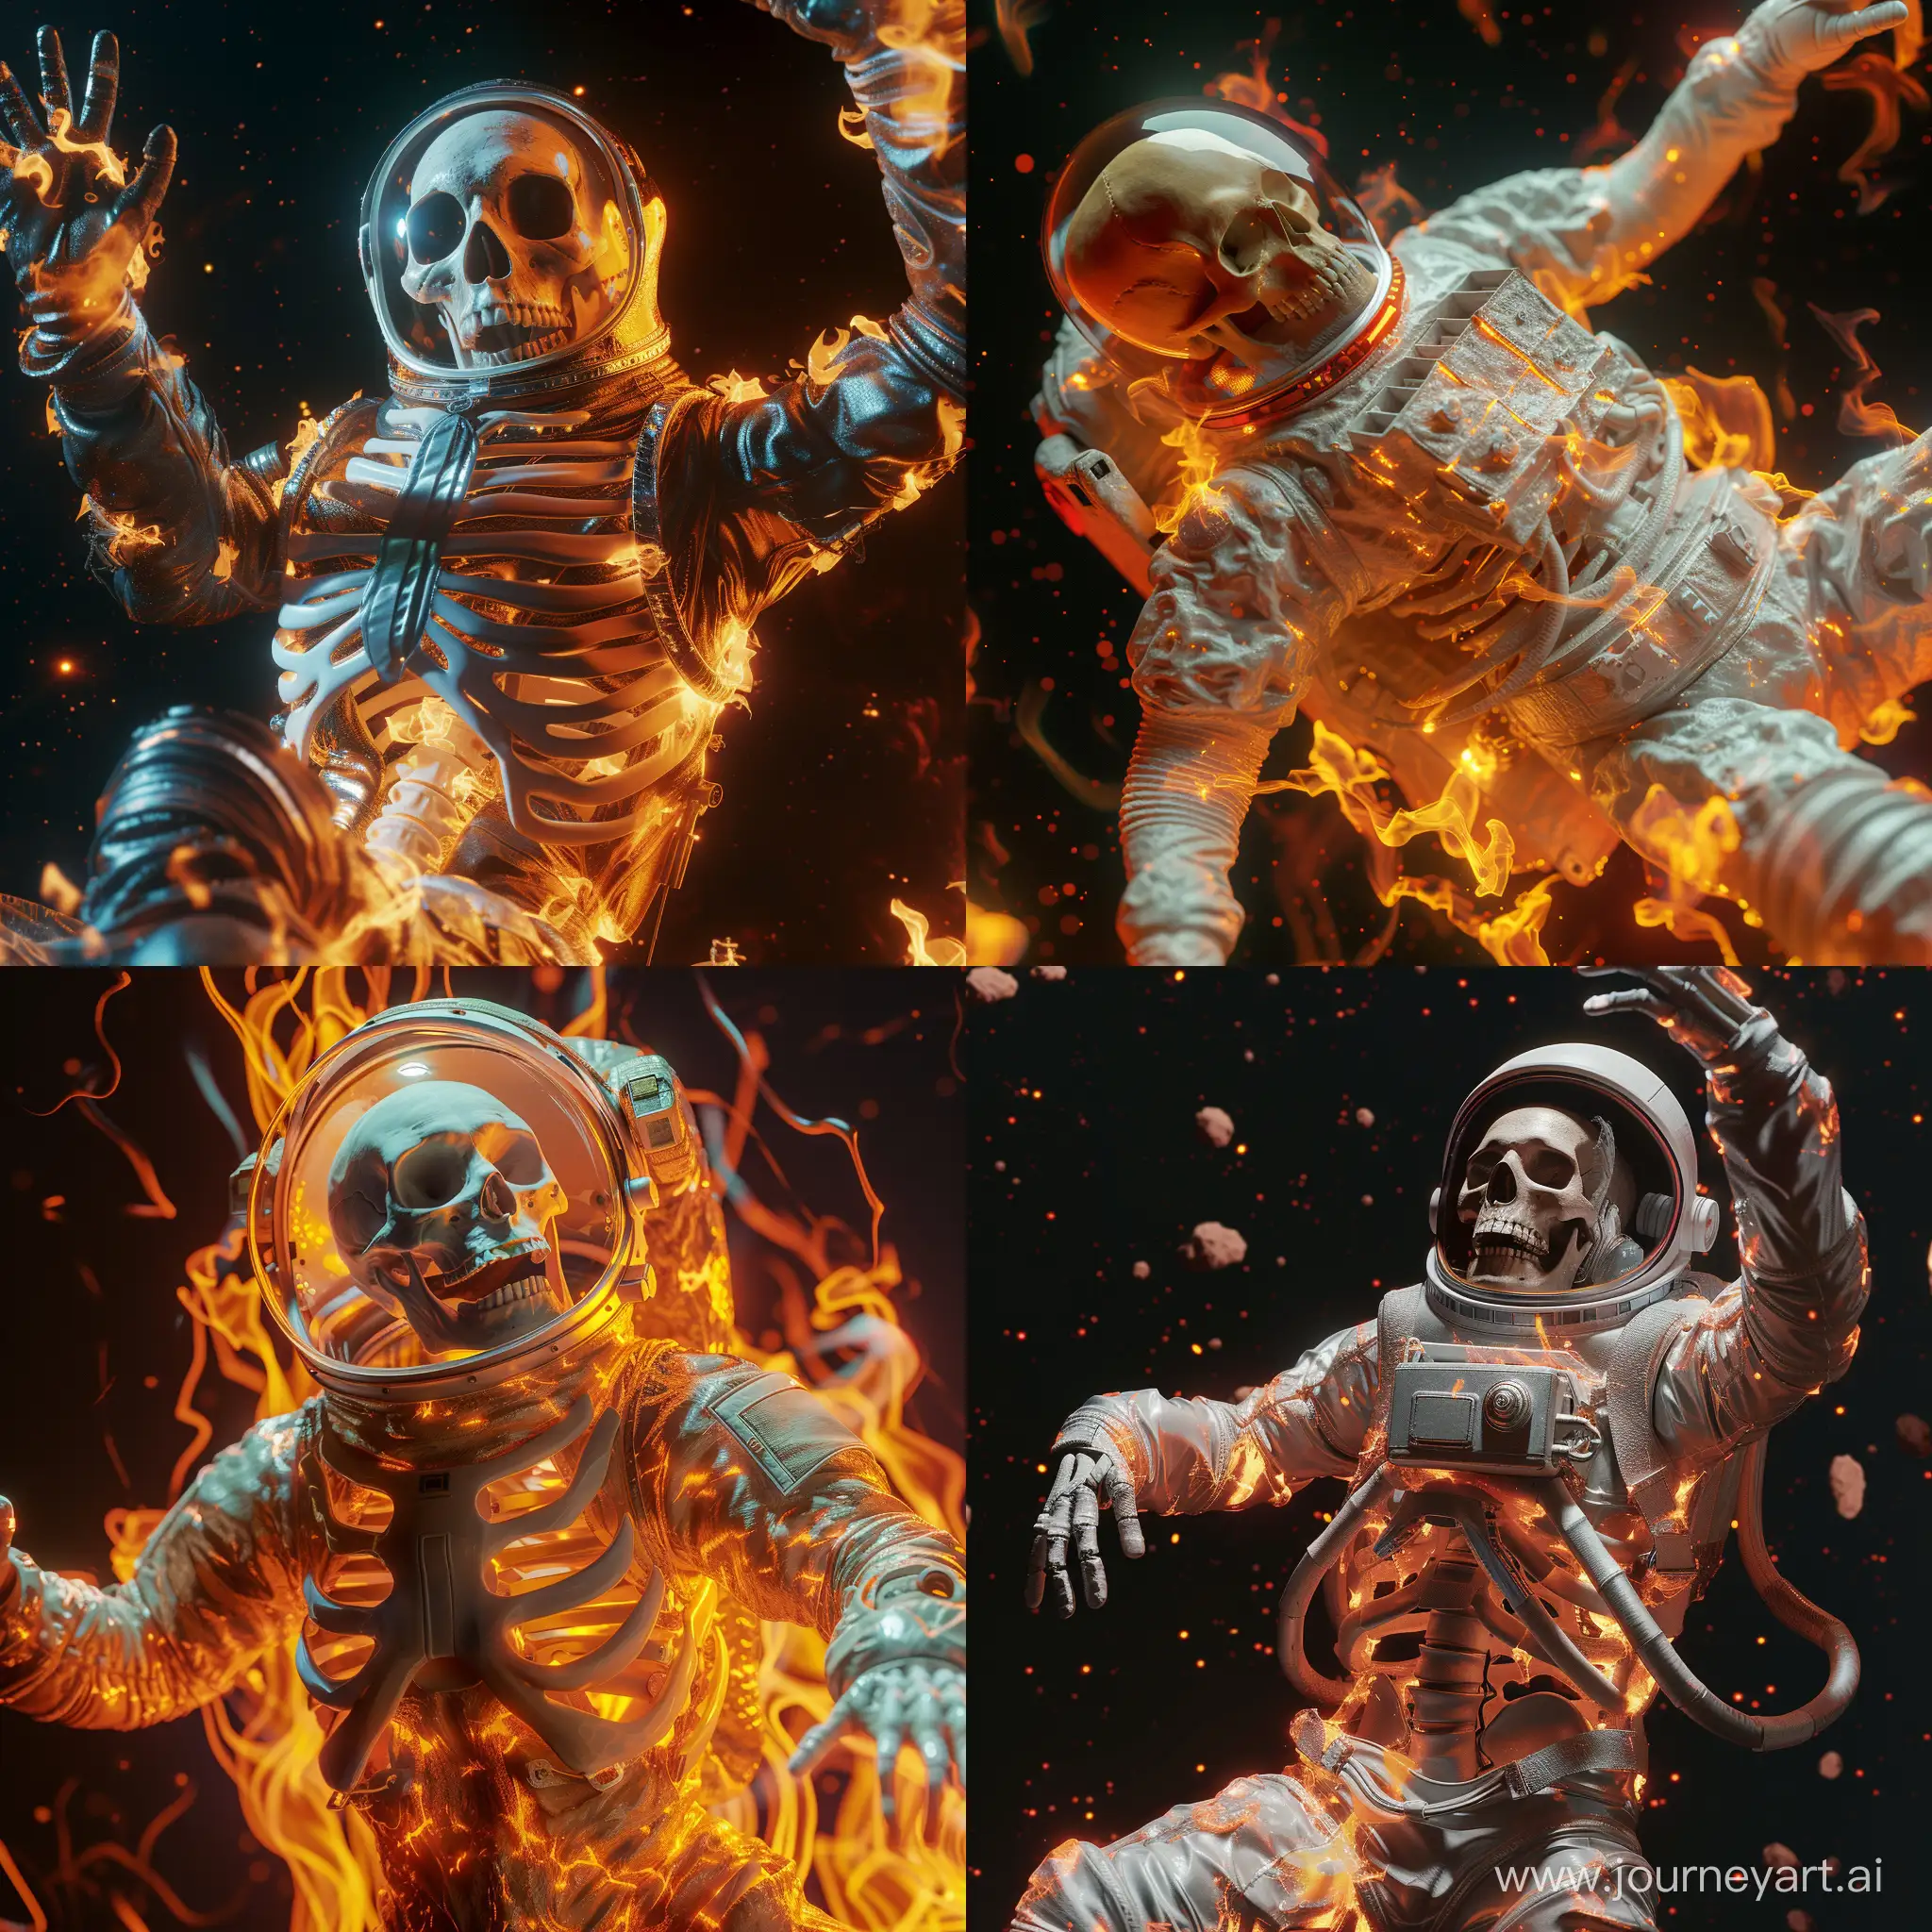 Skeletal-Astronaut-in-Stylish-Plastic-Suit-Amid-Space-Fire